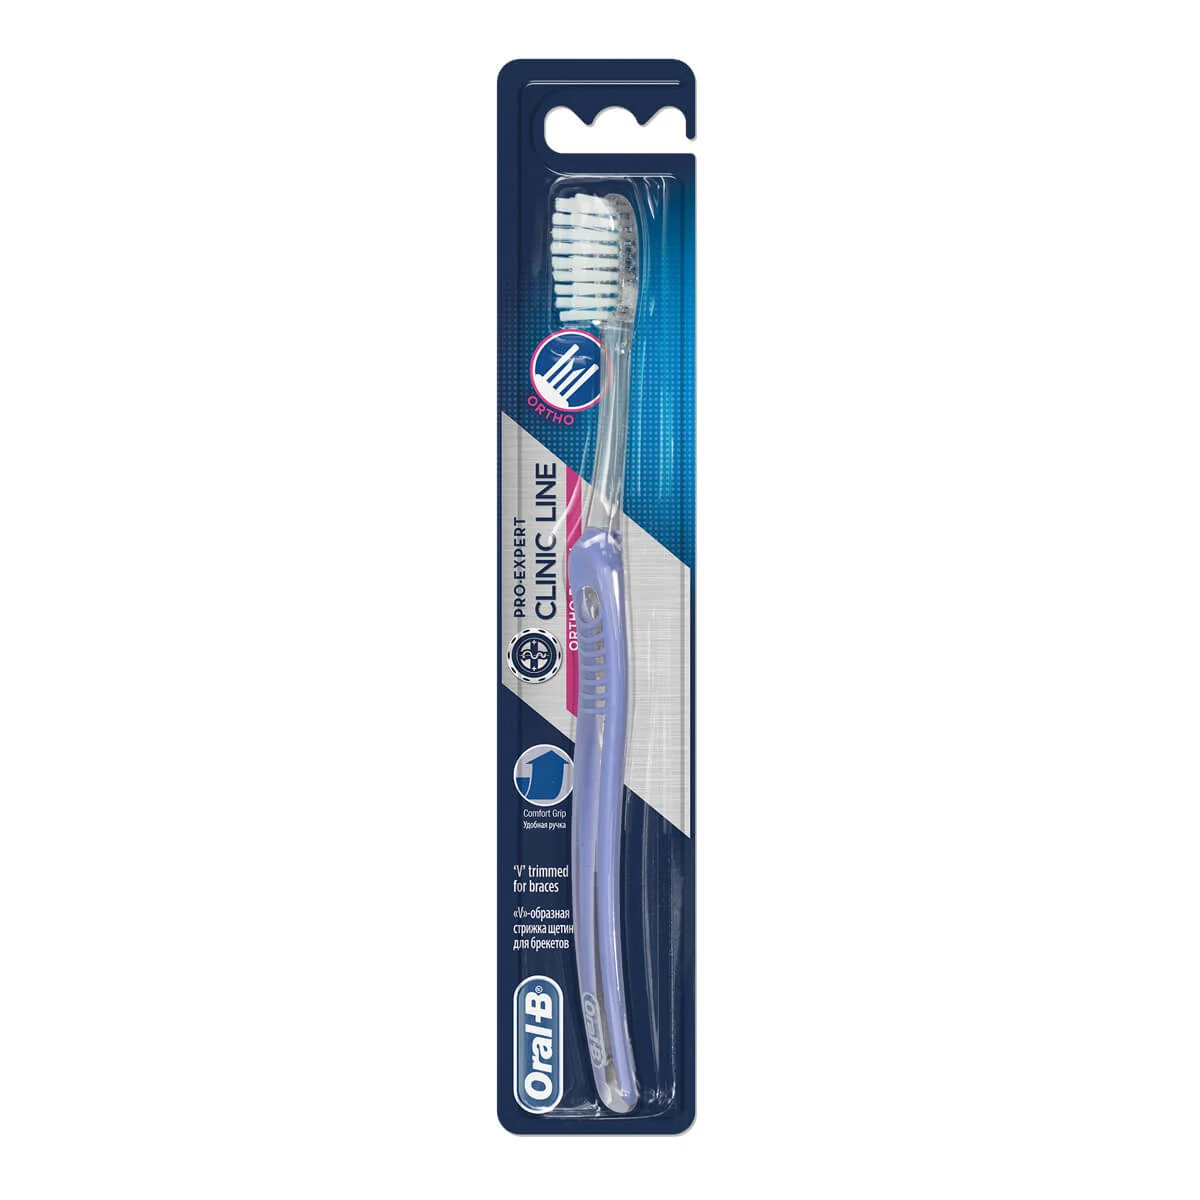 Oral-B Pro-Expert Clinic Line Orthodontic Manual Toothbrush undefined